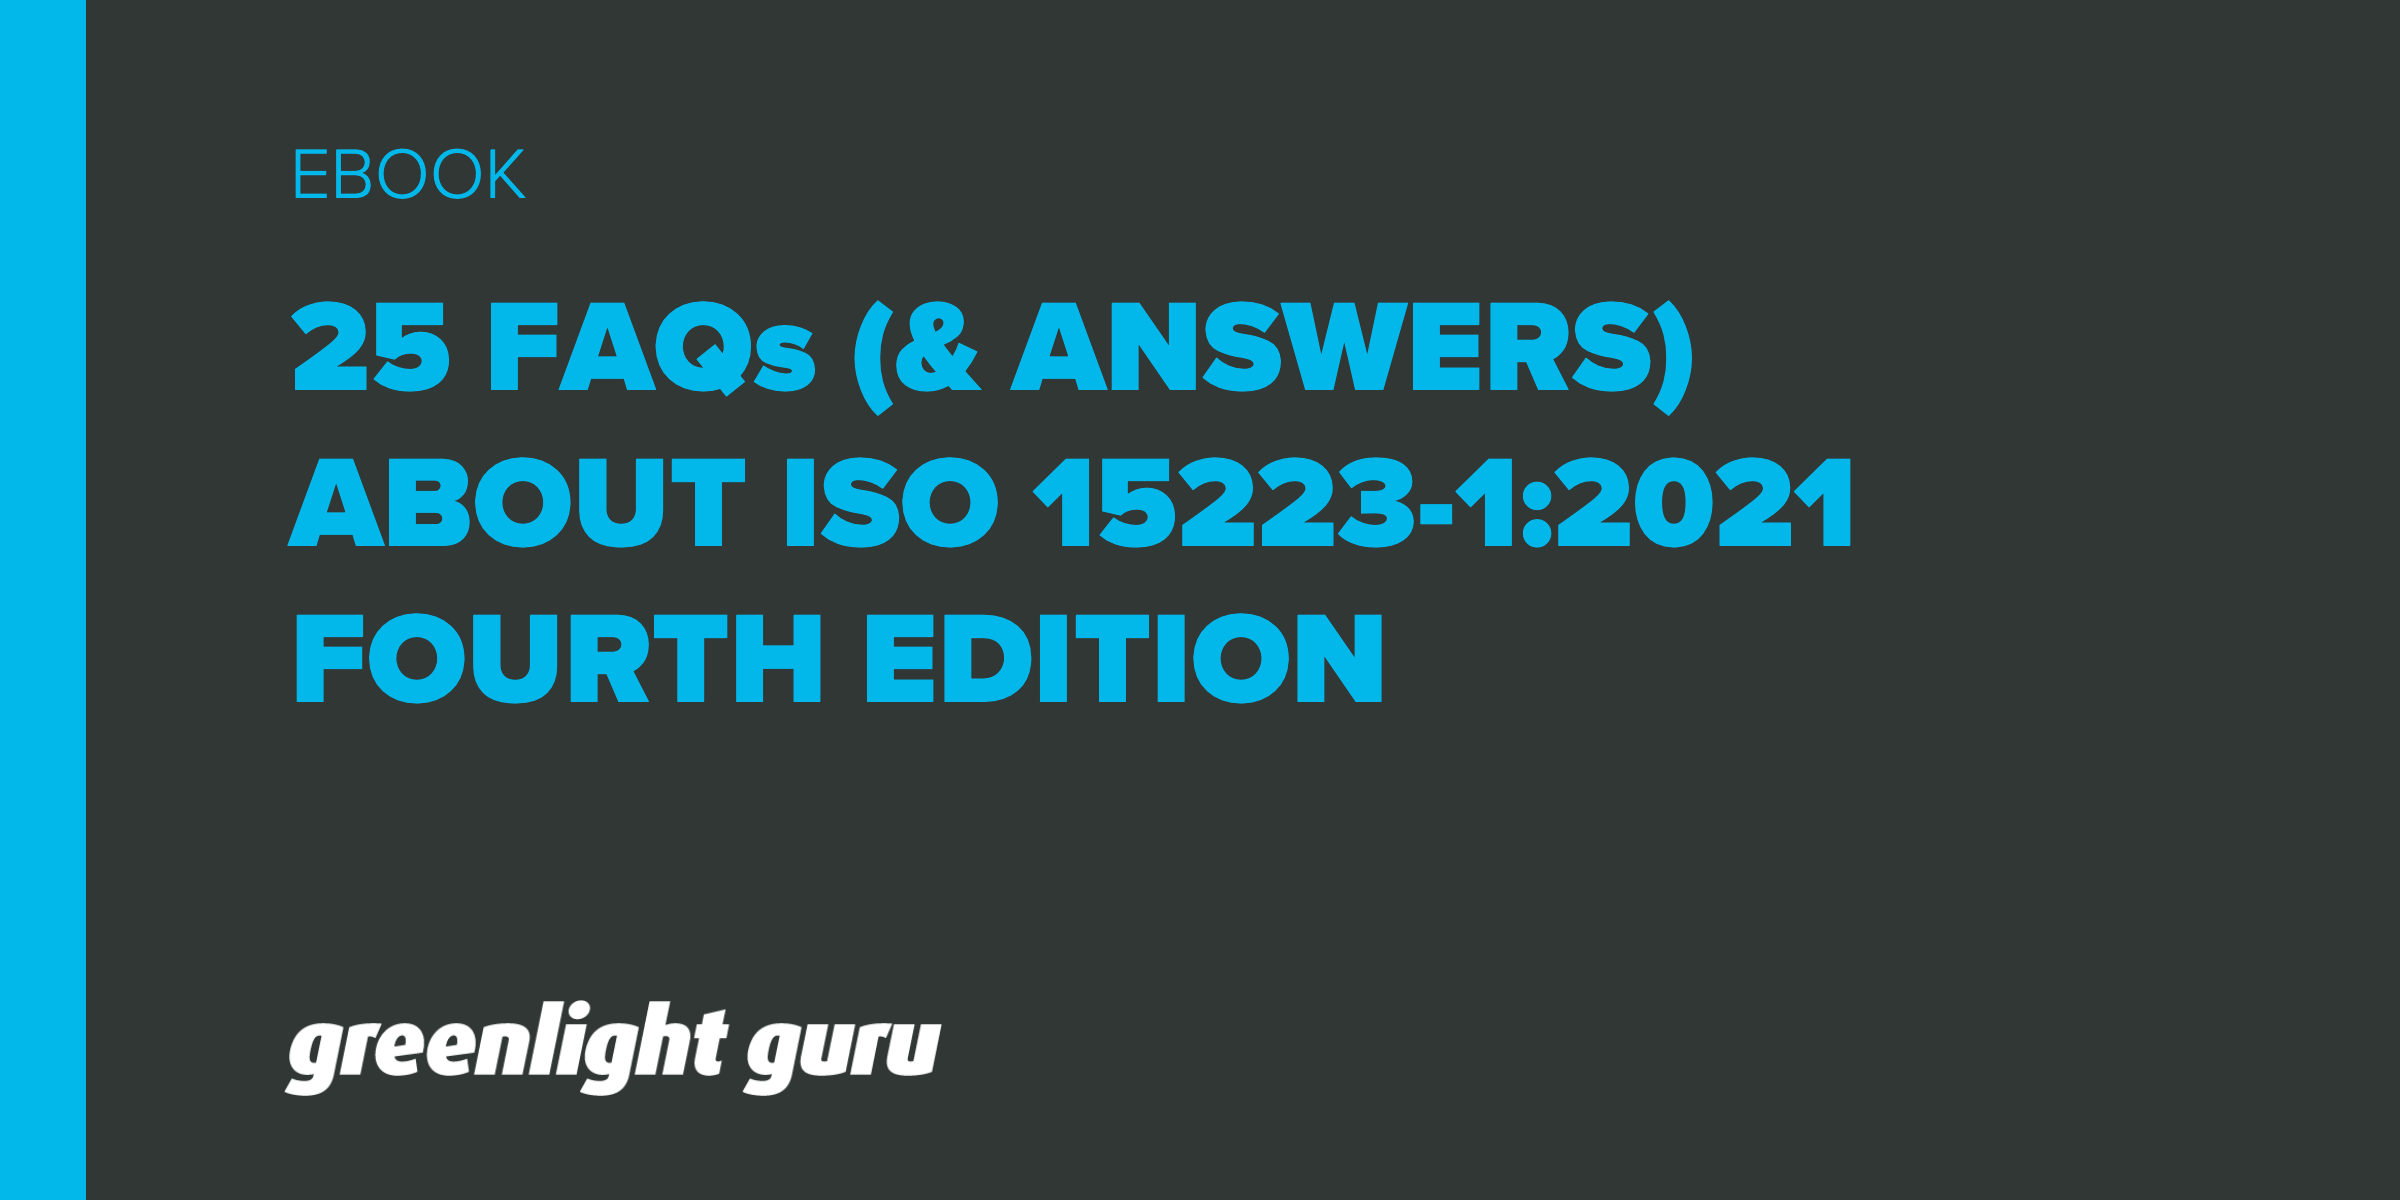 25 FAQs (& Answers) about ISO 15223-1:2021 Fourth Edition